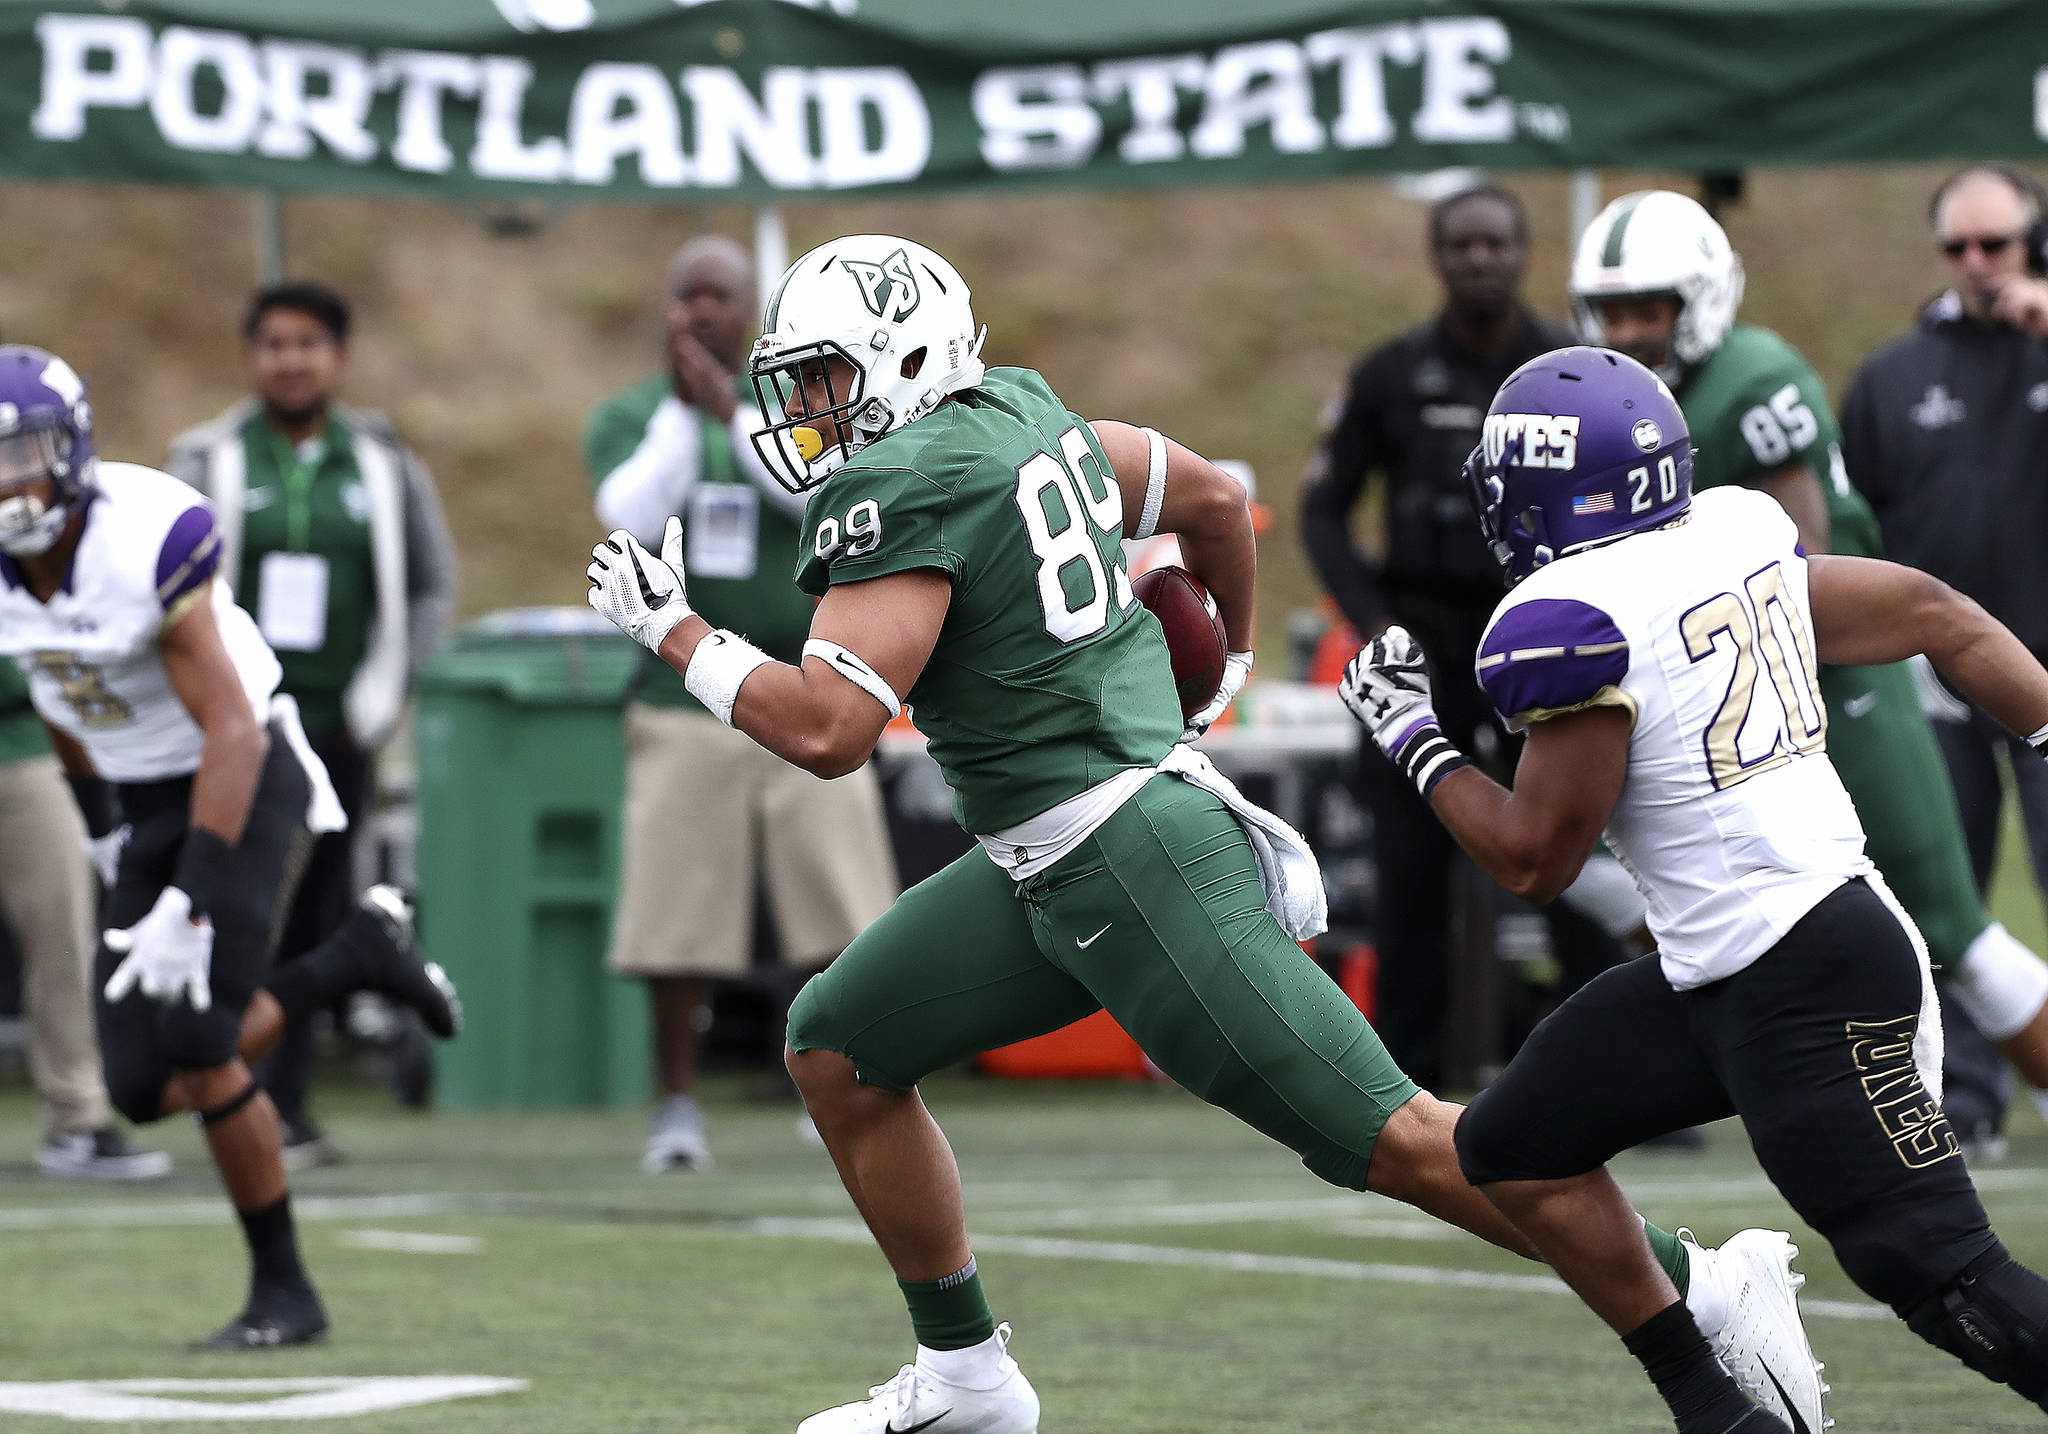 Taumoepeau, No. 89, outruns the College of Idaho DB David Ford, No. 20, in Portland State’s home game on Sept. 15. Photo courtesy of Larry Lawson